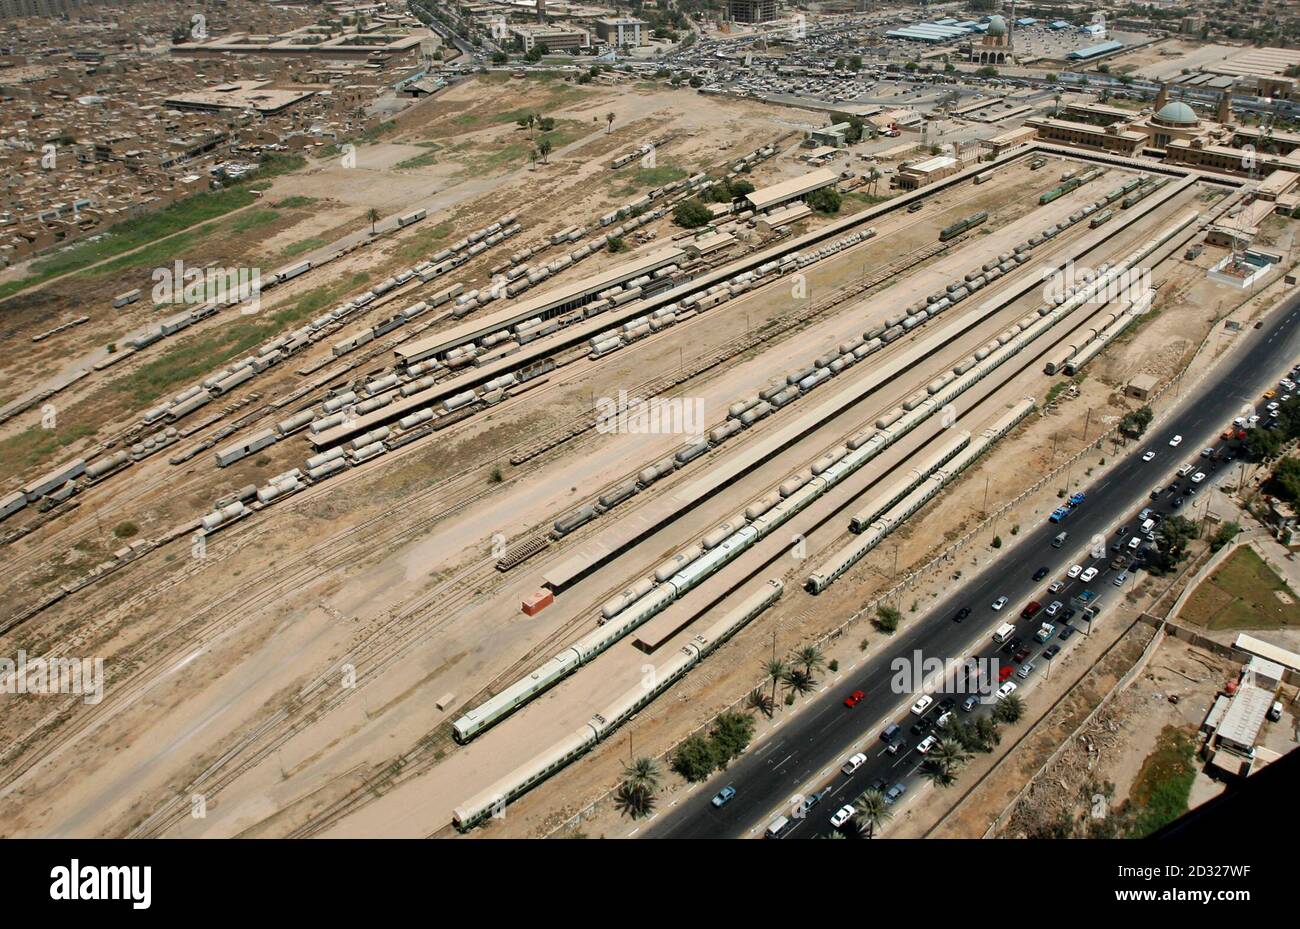 An aerial view of Baghdad Railway station, where passenger commuter coaches and liquified petroleum gas tankers are parked, as seen from a U.S. military helicopter flying over central Baghdad June 4, 2008. Picture taken June 4, 2008.   REUTERS/Erik de Castro (IRAQ) Stock Photo